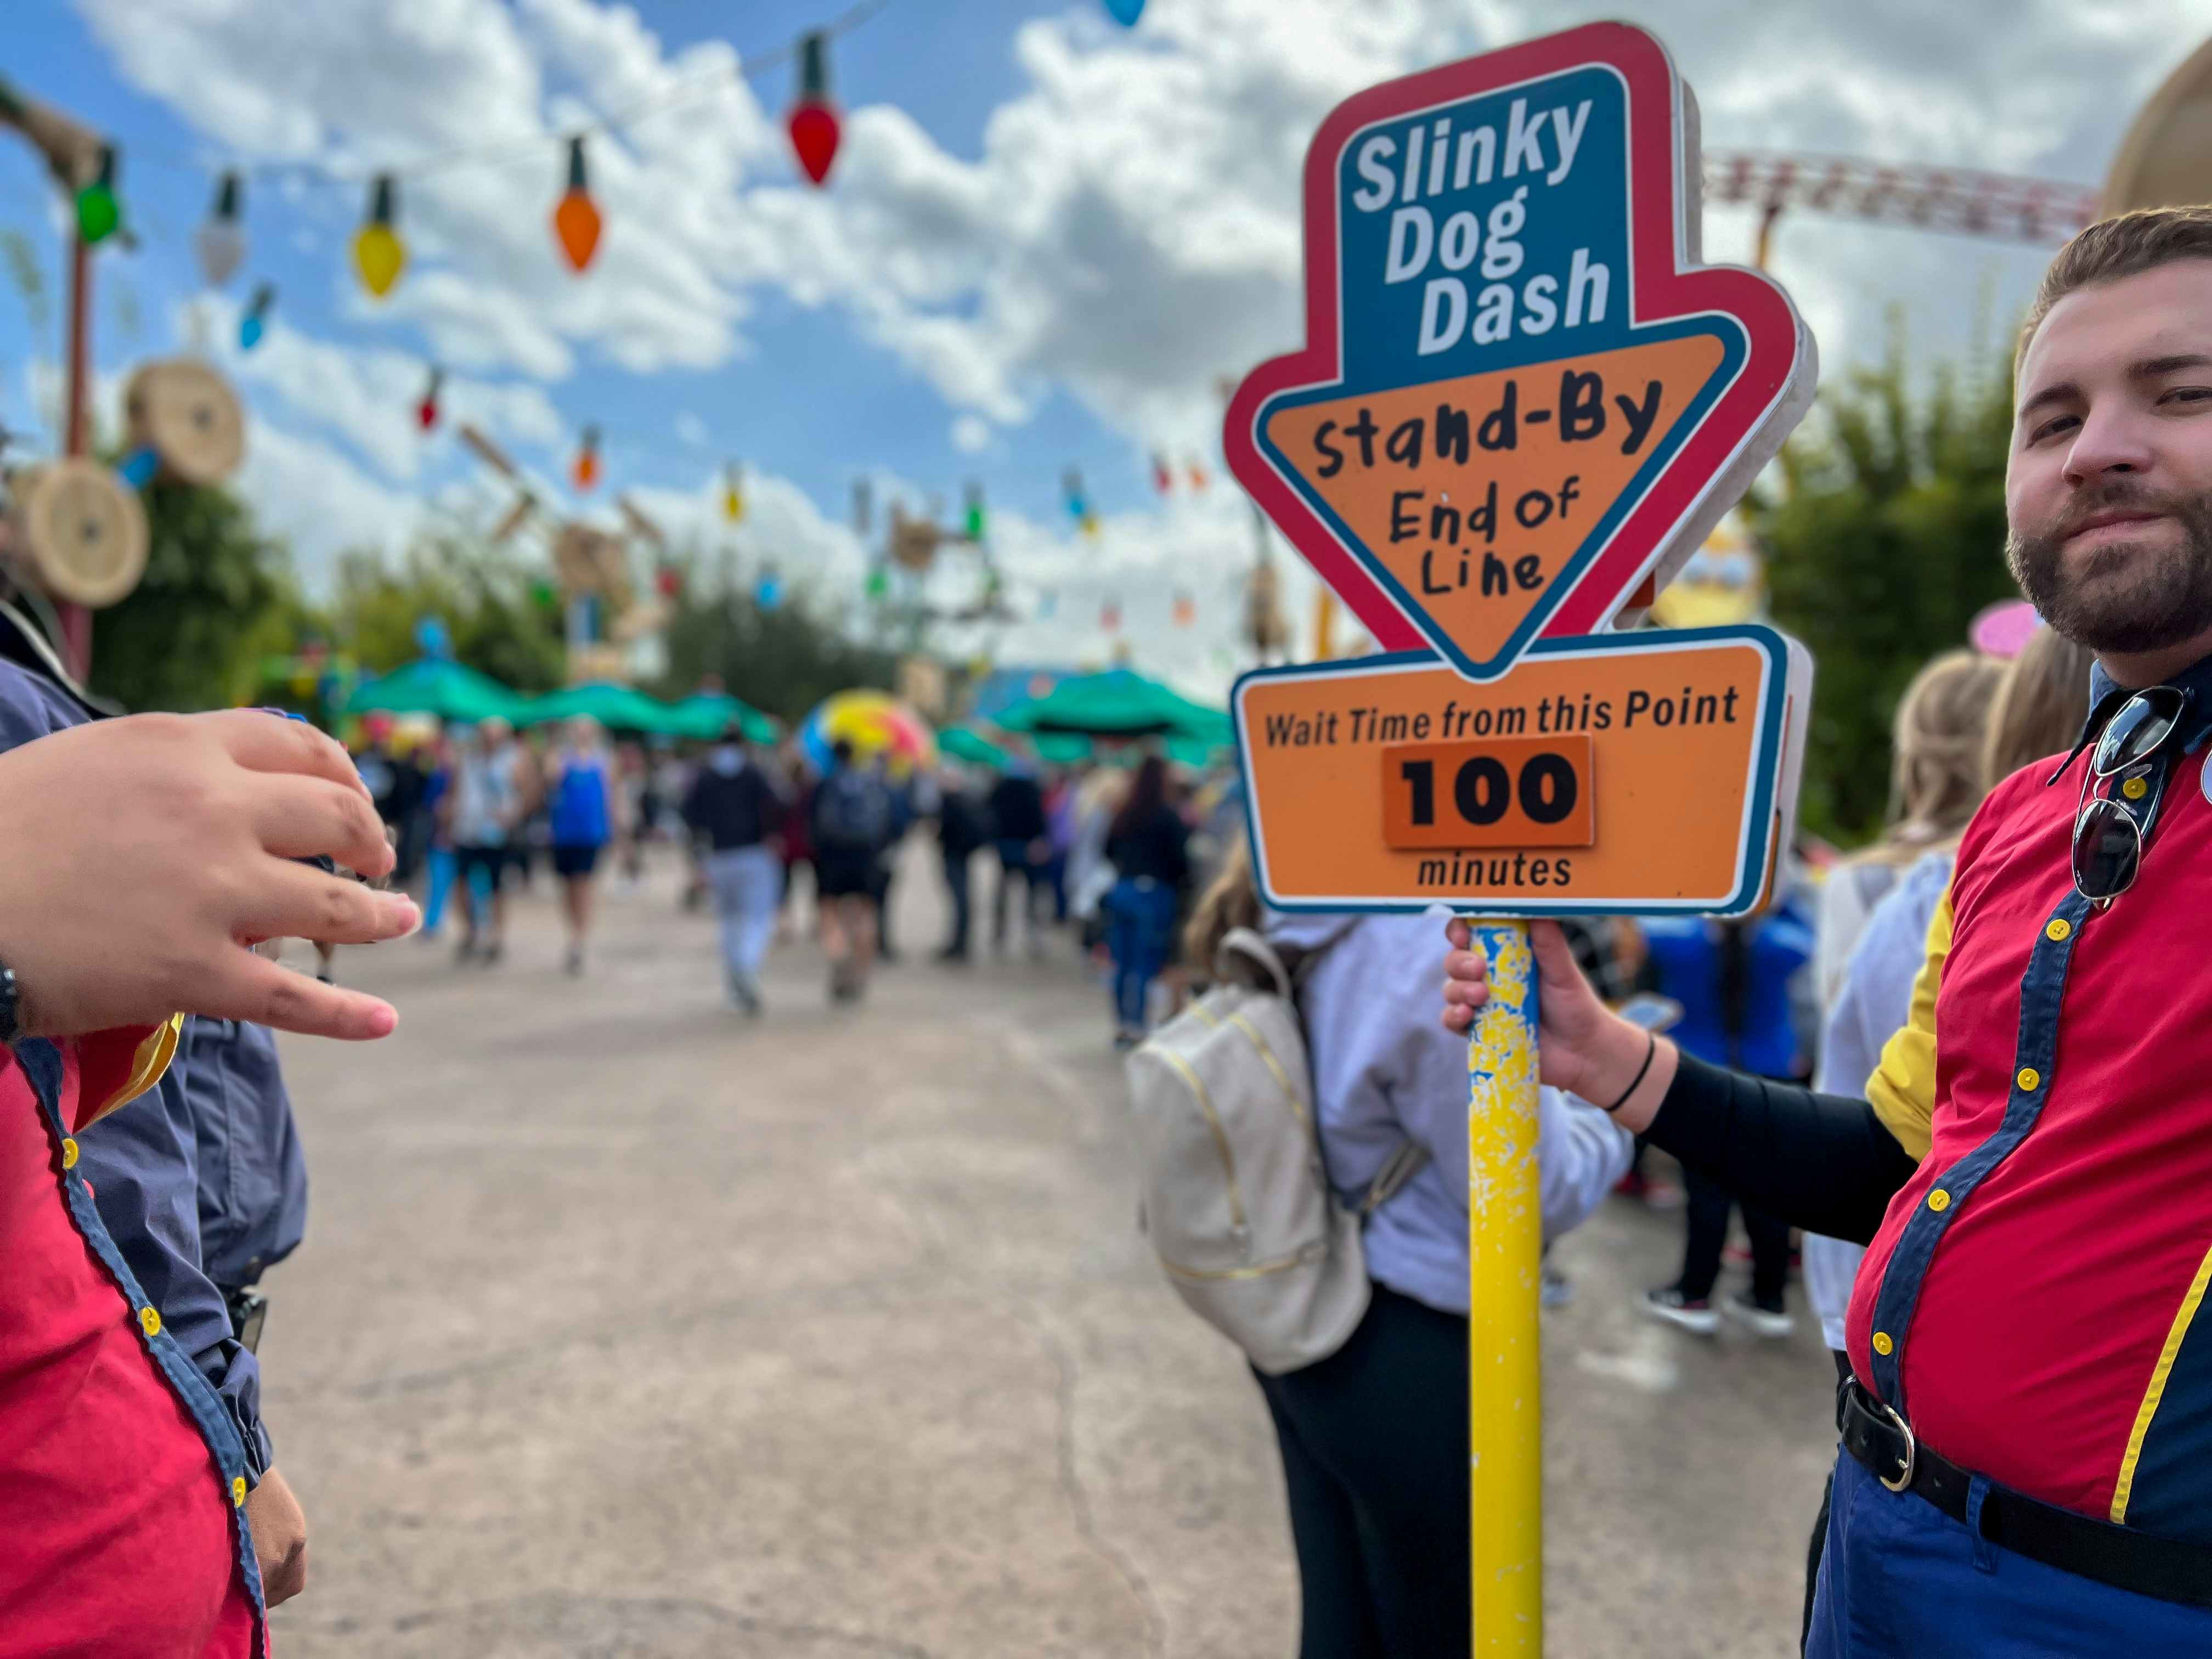 A Disney employee holding a sign for the Slinky Dog Dash ride, indicating that the wait time from that point is 100 minutes.